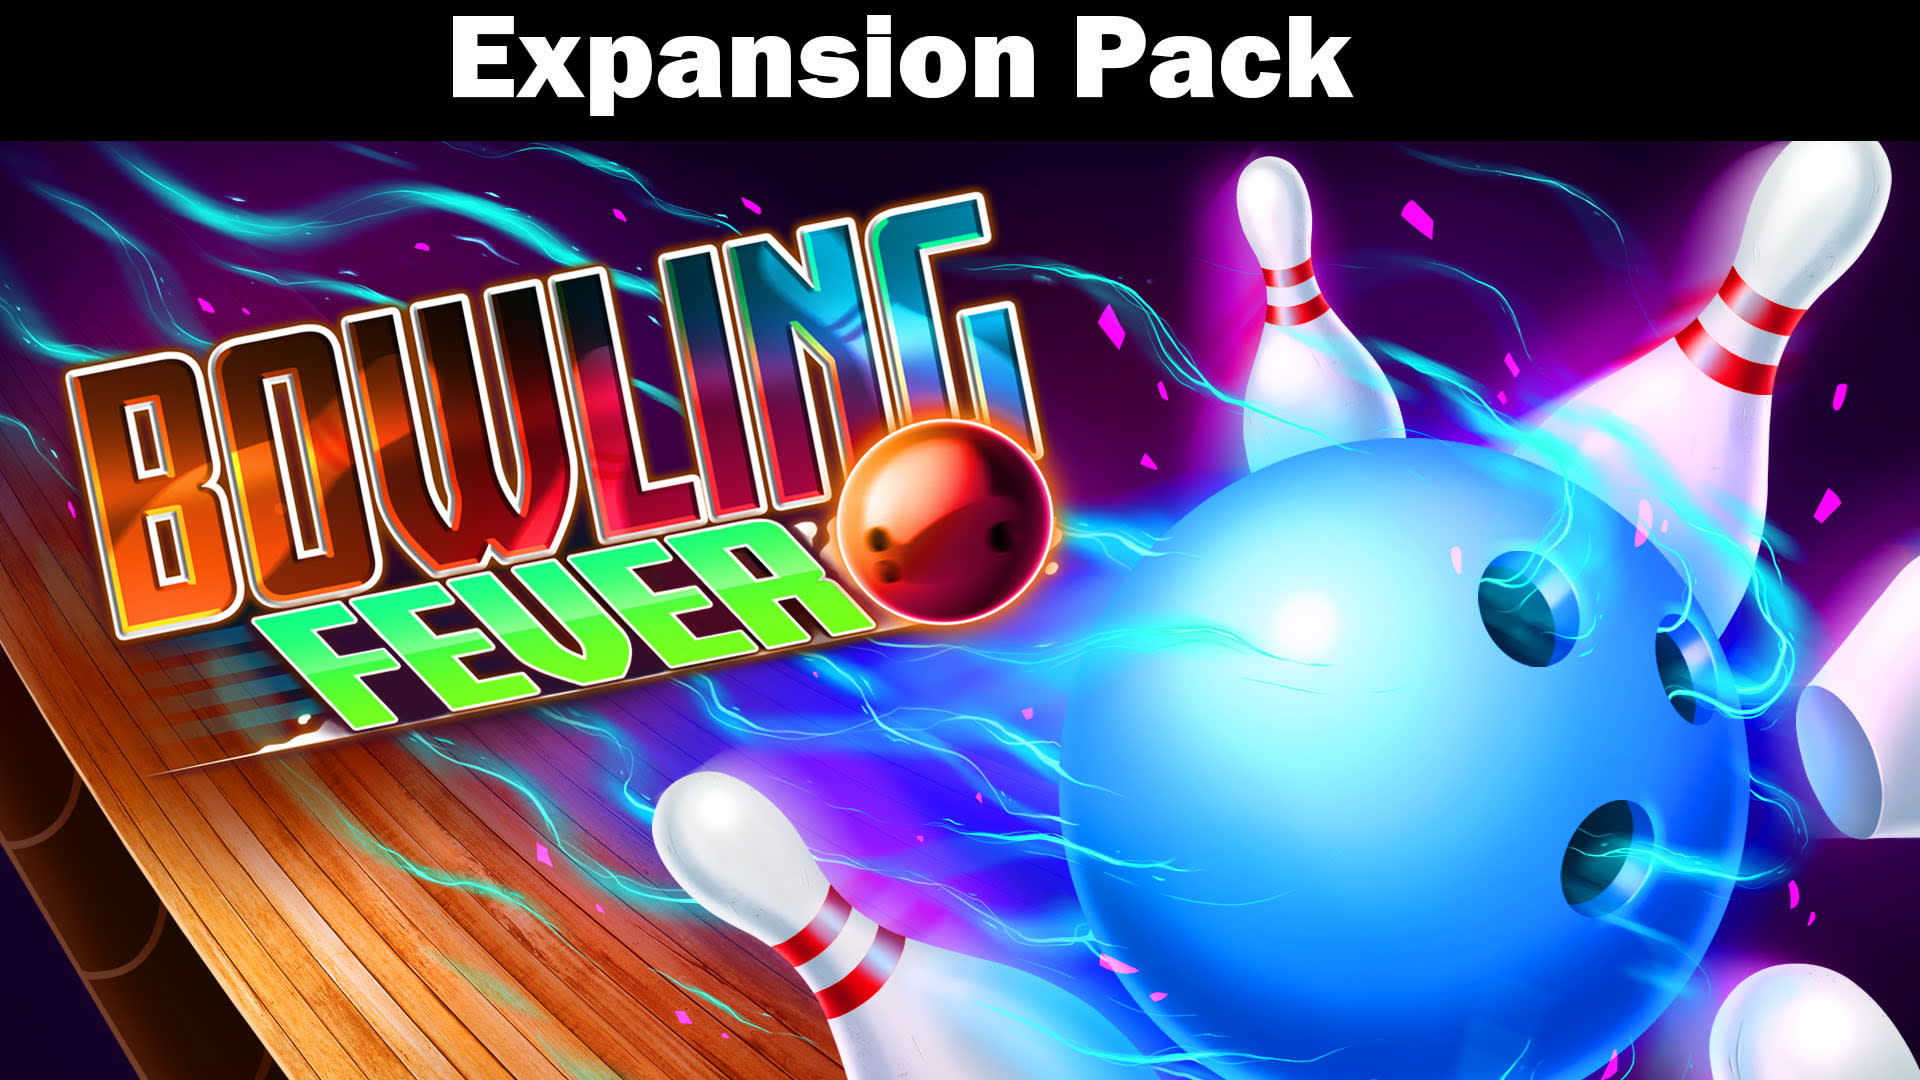 Bowling Fever Expansion Pack